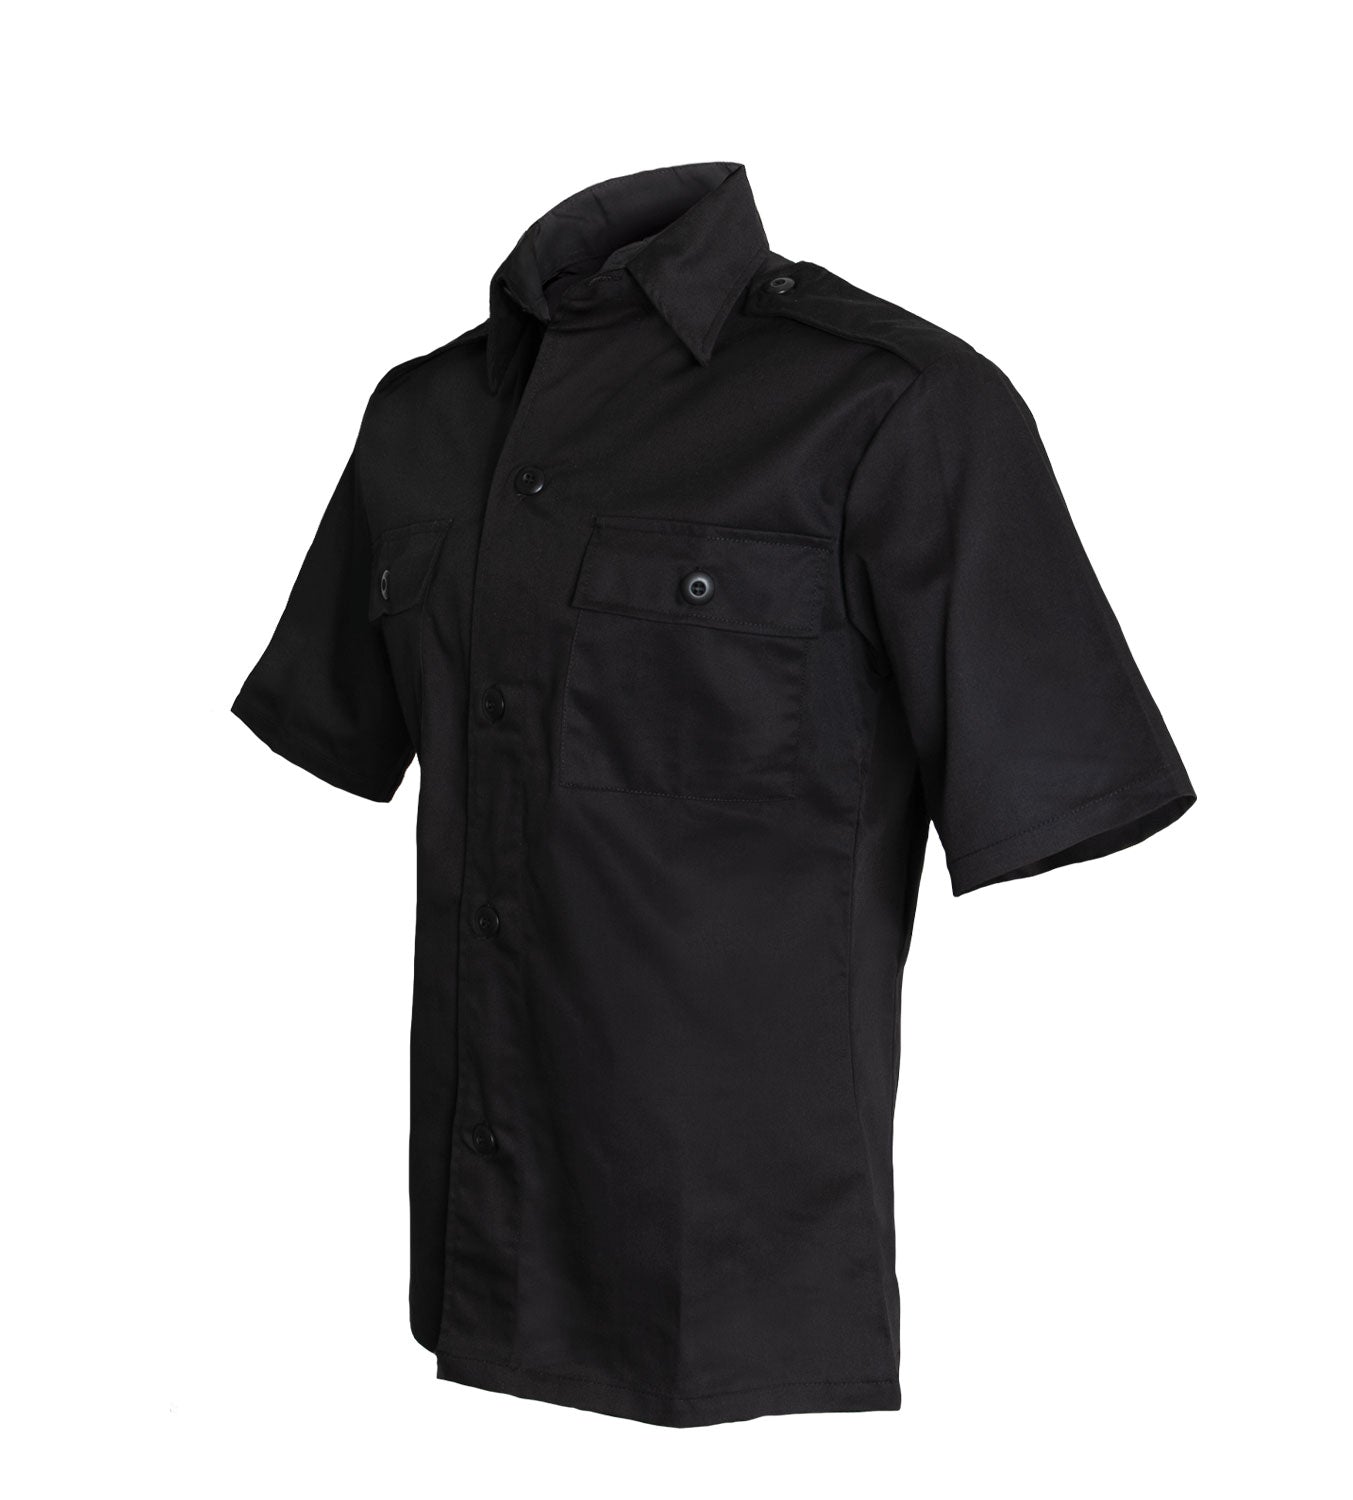 [Public Safety] Poly/Cotton Short-Sleeve Tactical Shirts